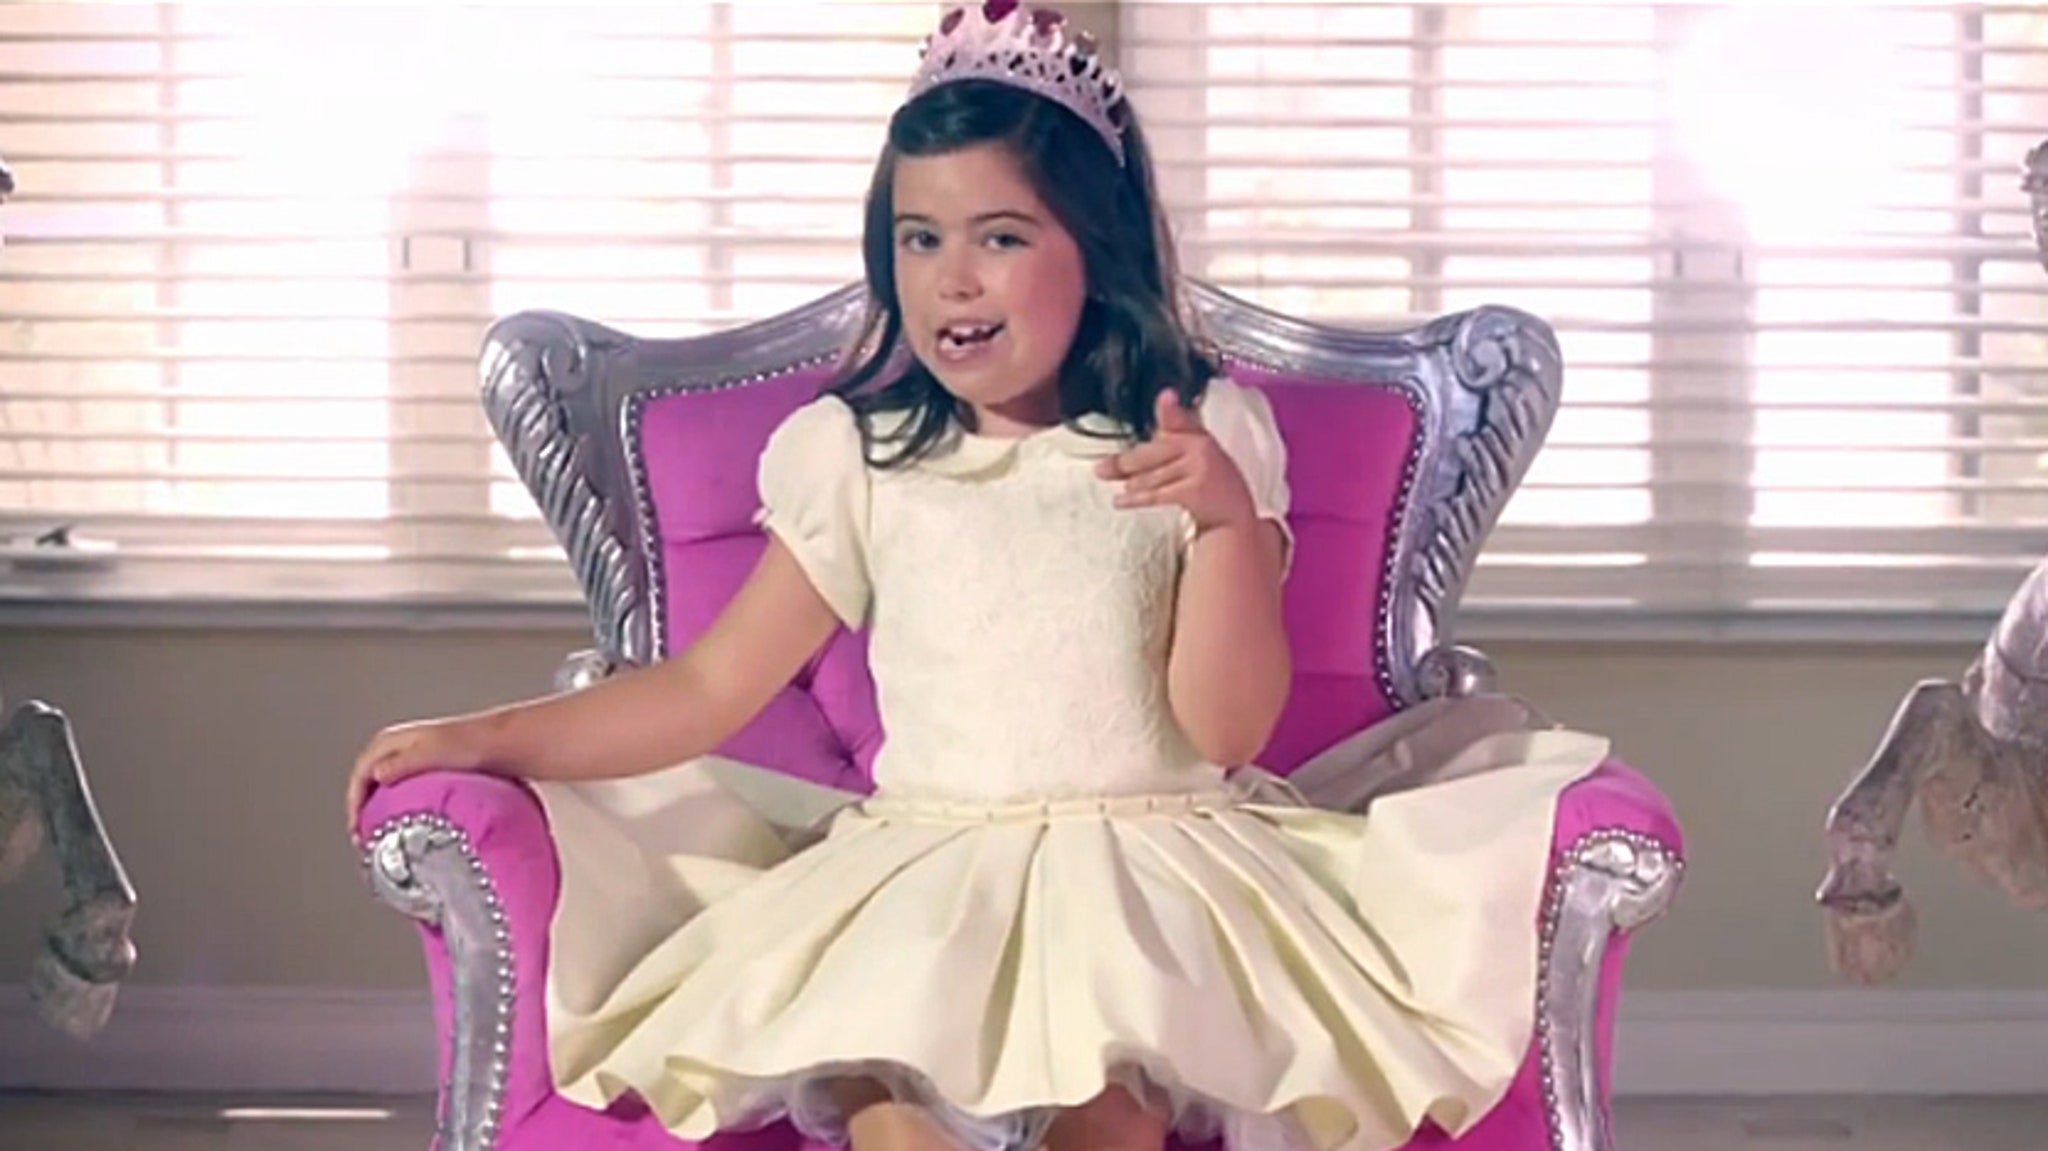 Sophia Grace Music Video: Quite Possibly The Most Disturbing Thing You